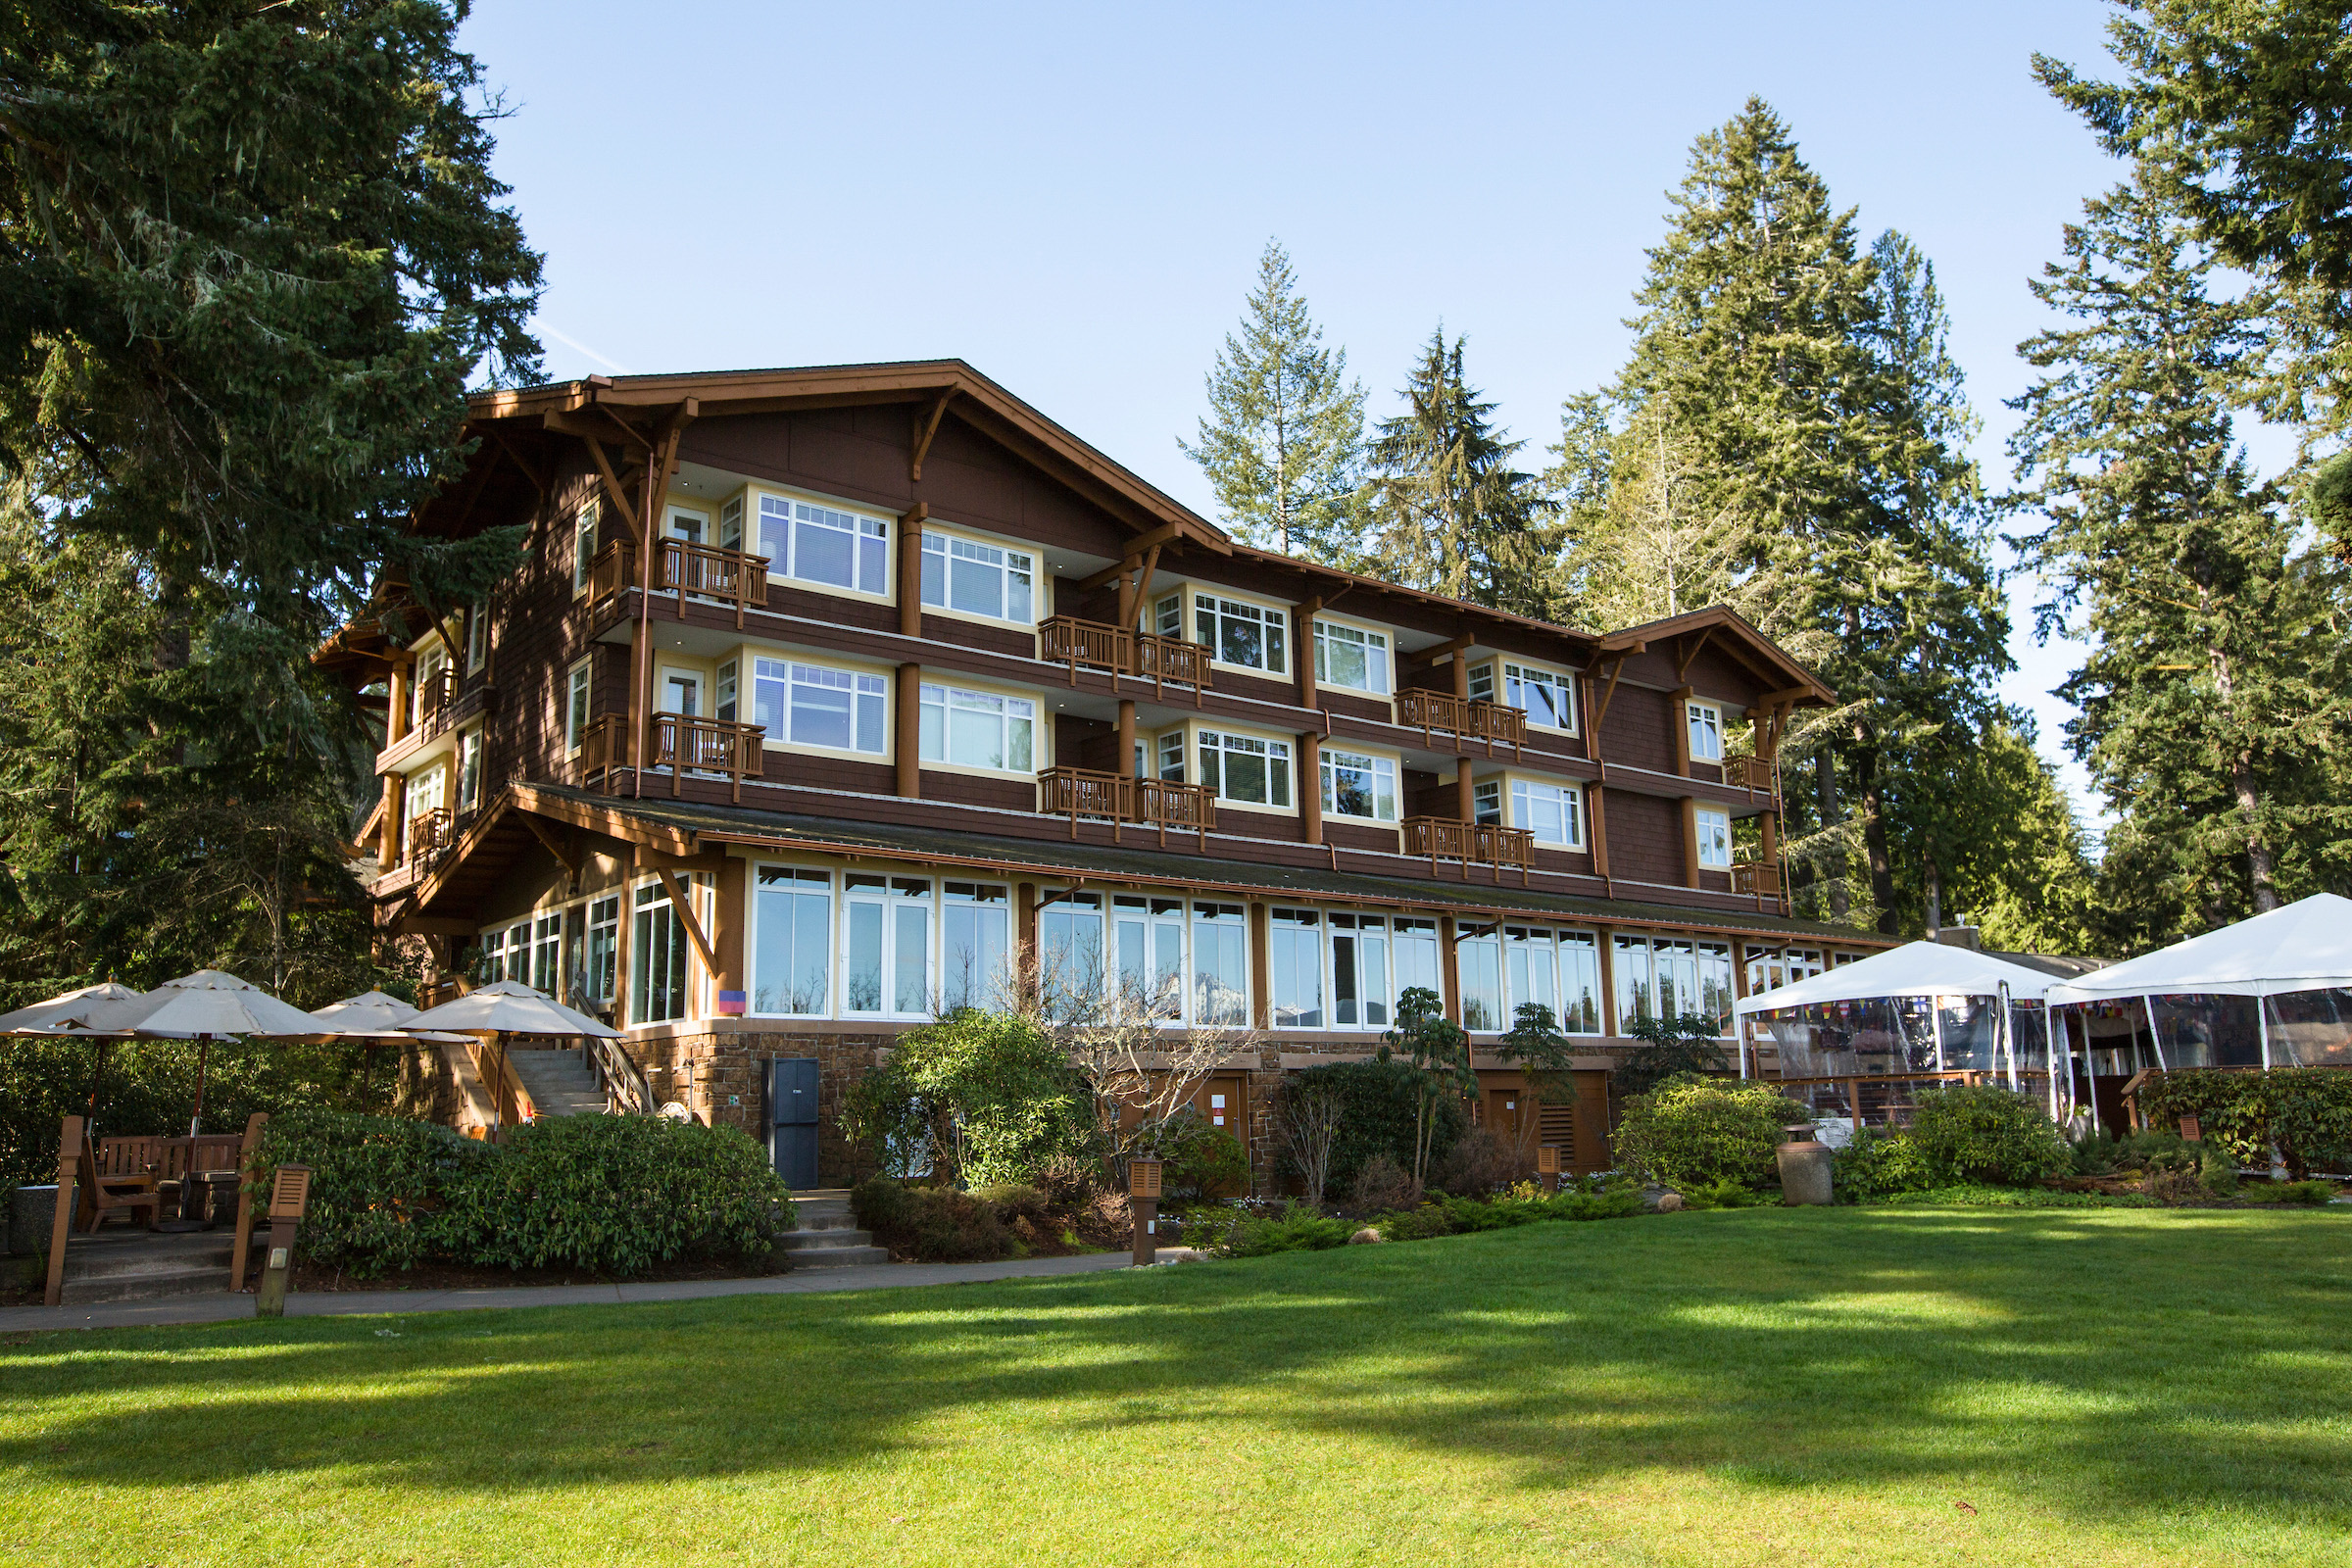 Picture of one of the main buildings at the Alderbrook Resort & Spa from the lawn along Puget Sound